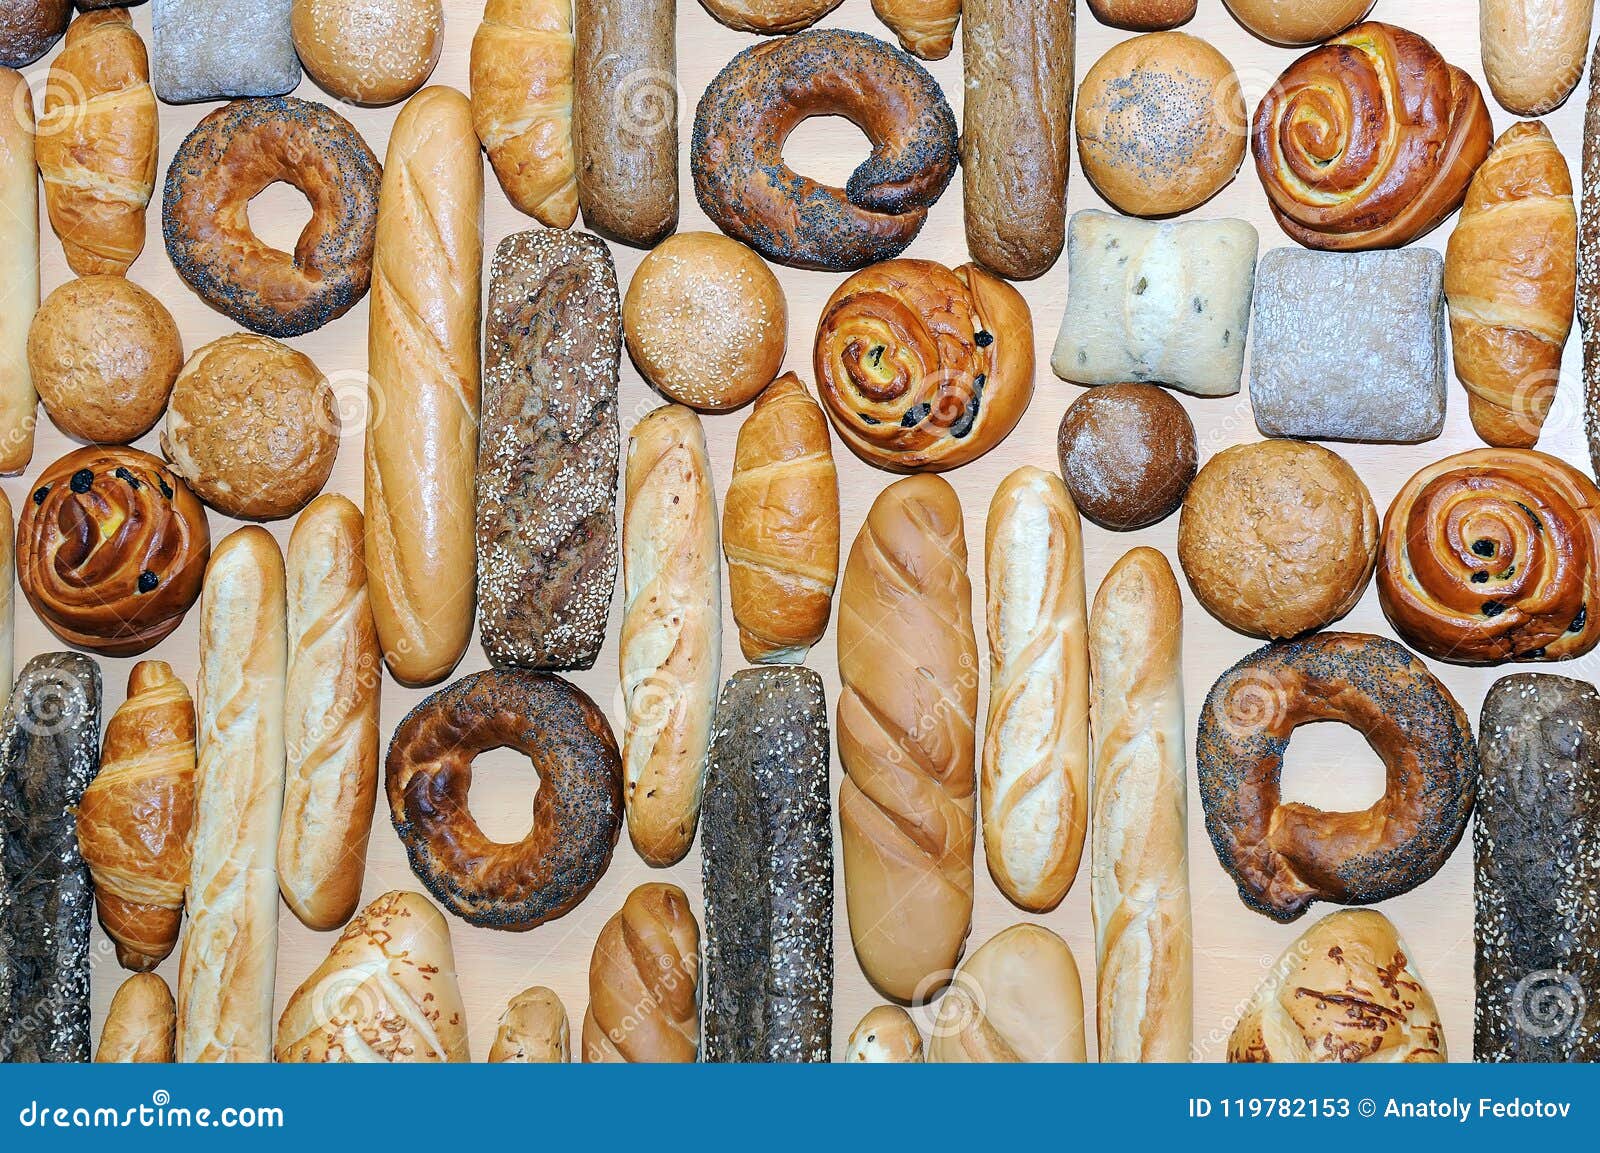 Assortment Bakery Products As A Background Stock Image Image Of